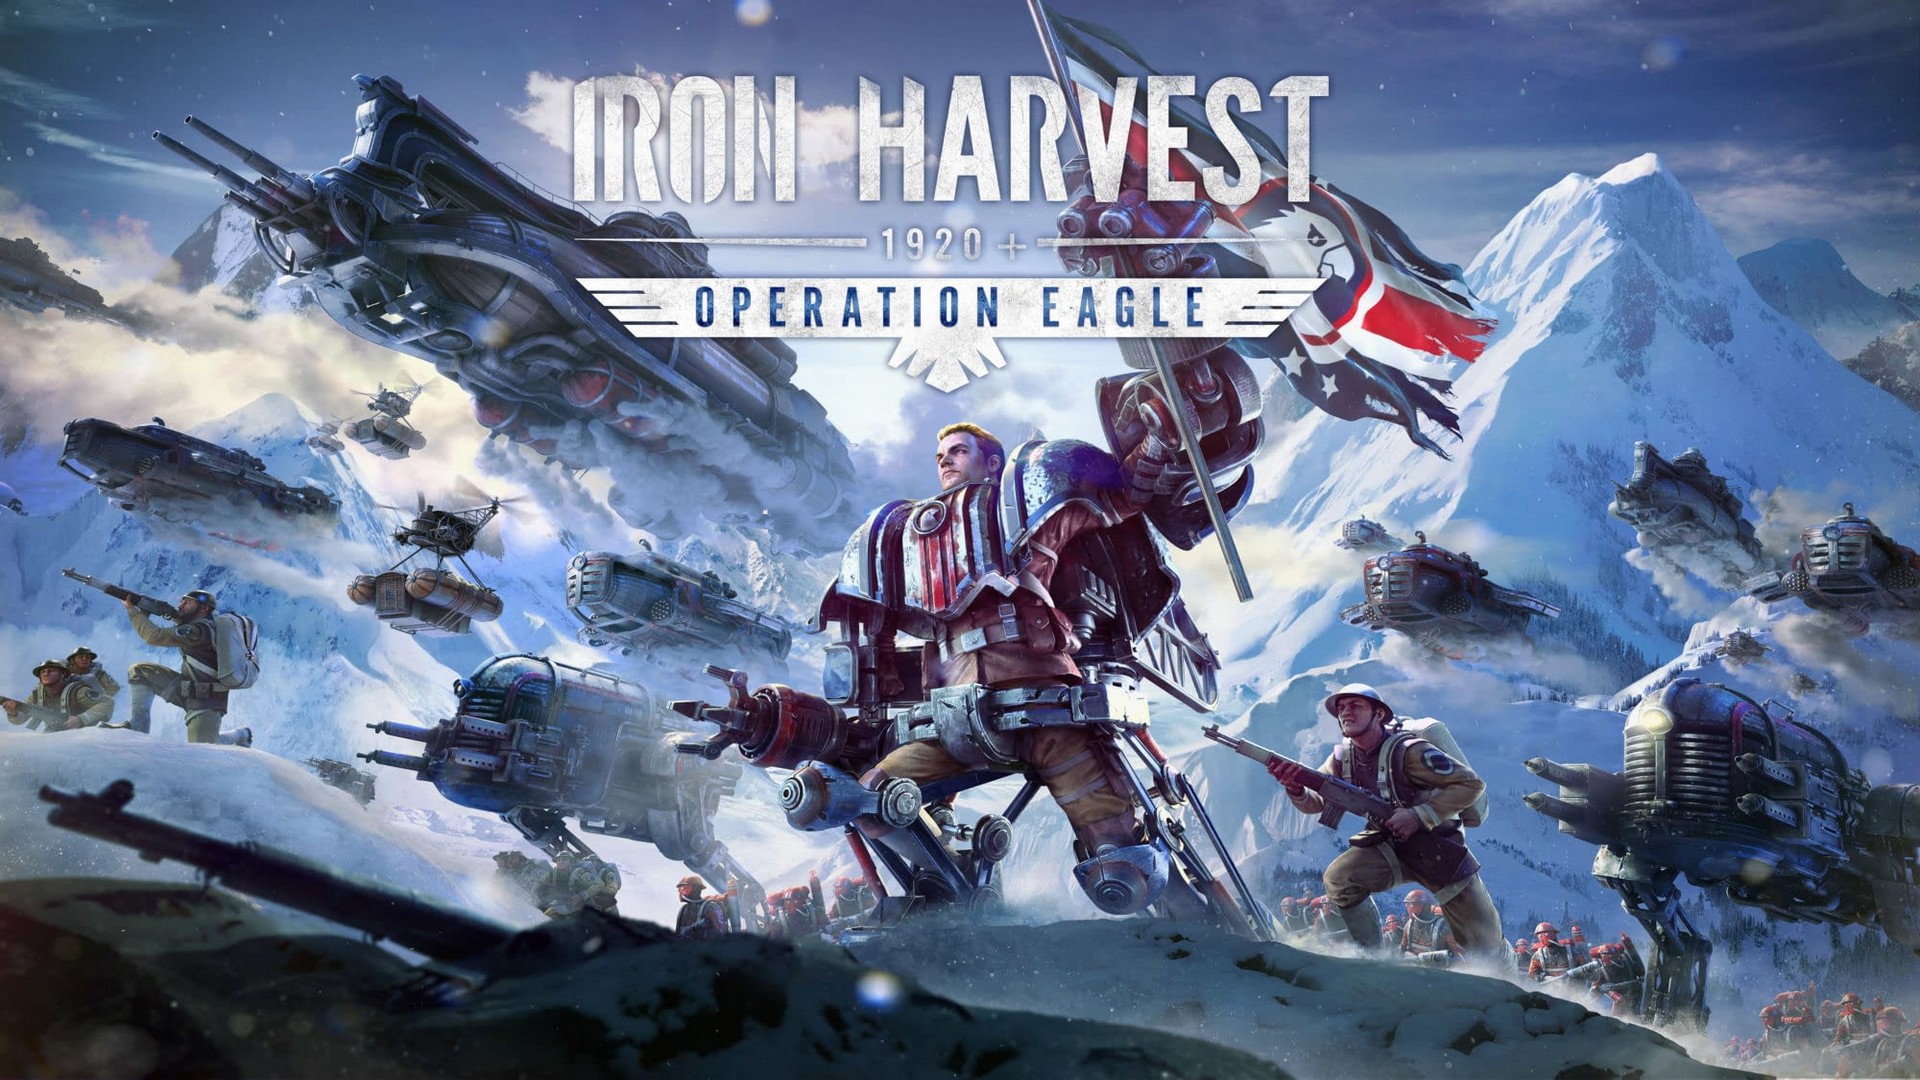 Iron Harvest 1920+ – The American Union of Usonia is Ready For Action